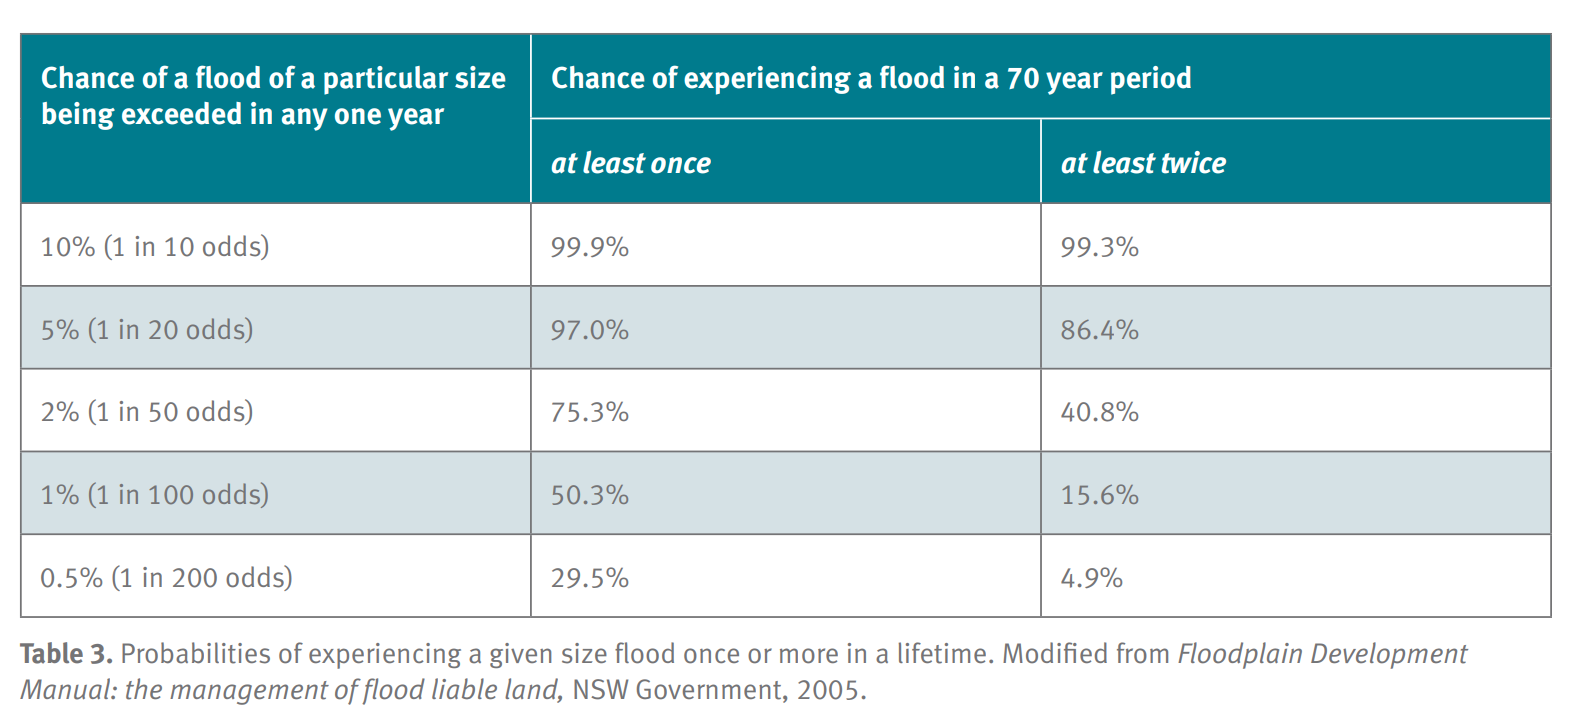 Probabilities of experiencing a given size flood once or more in a lifetime.